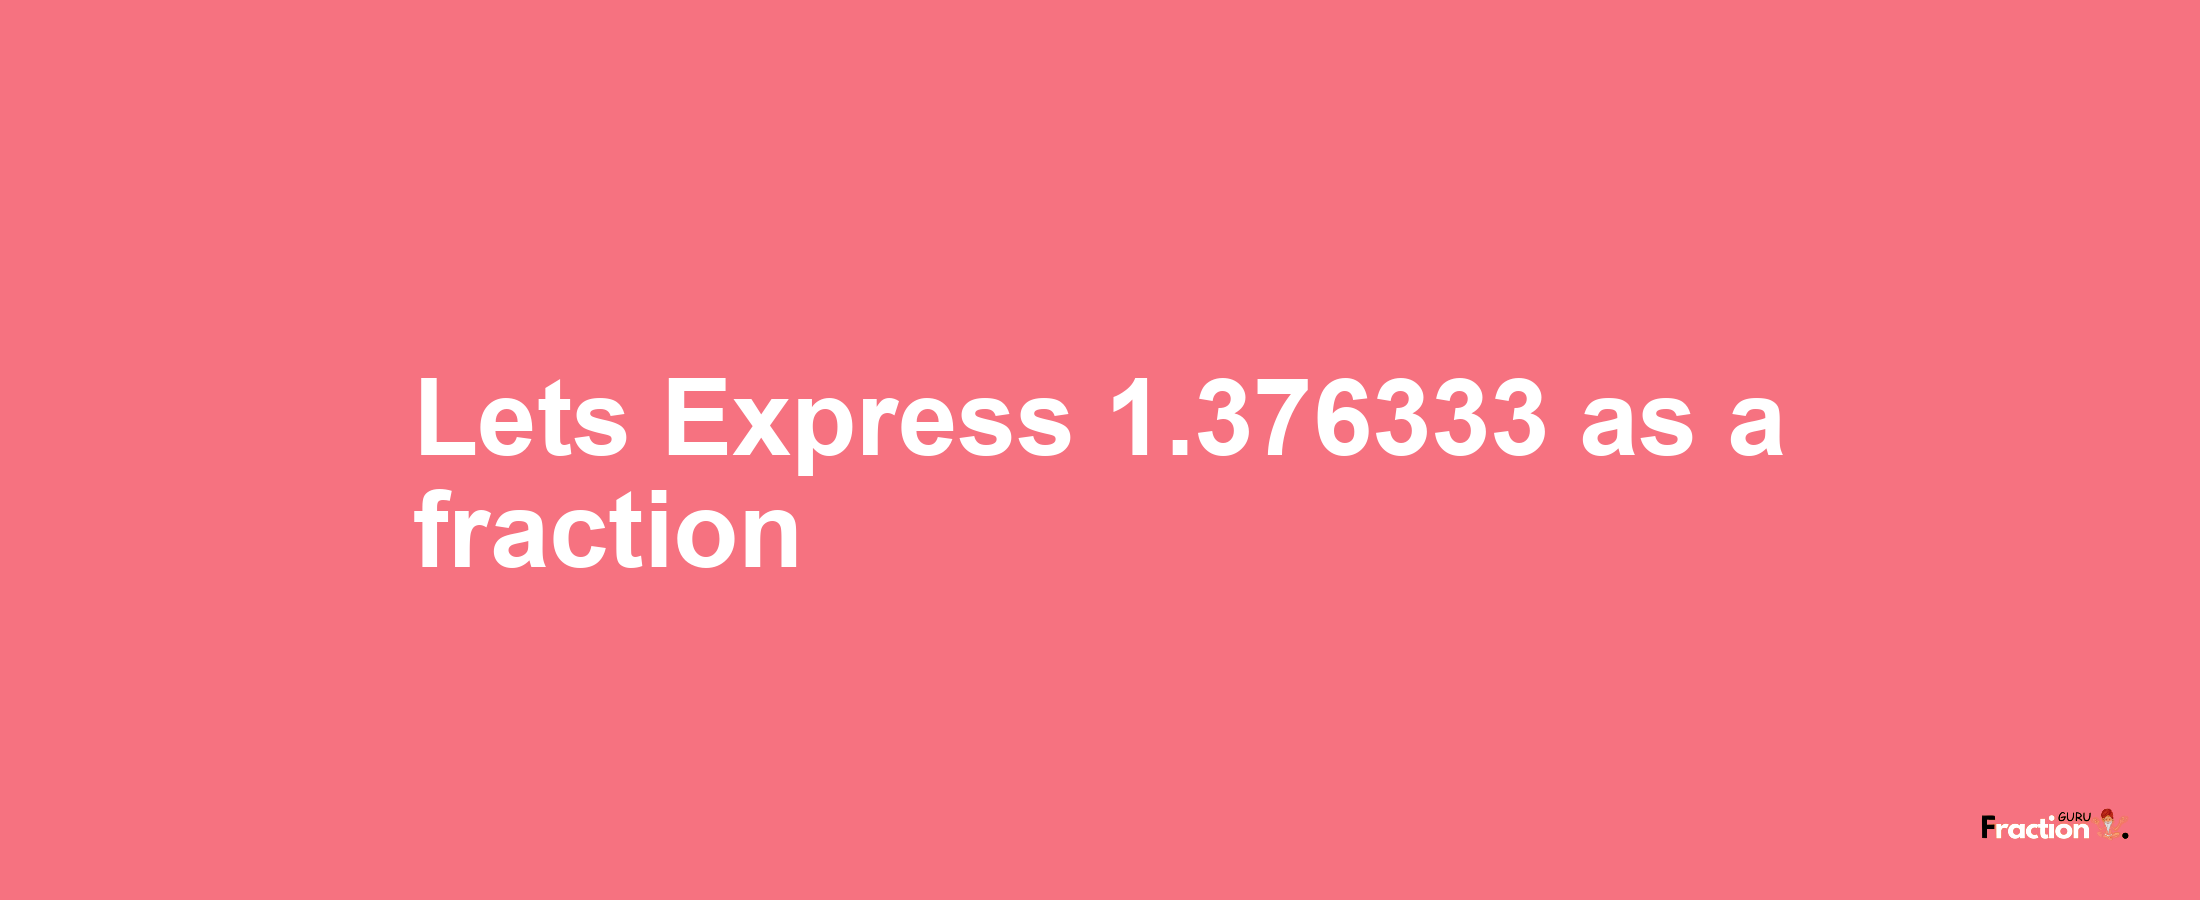 Lets Express 1.376333 as afraction